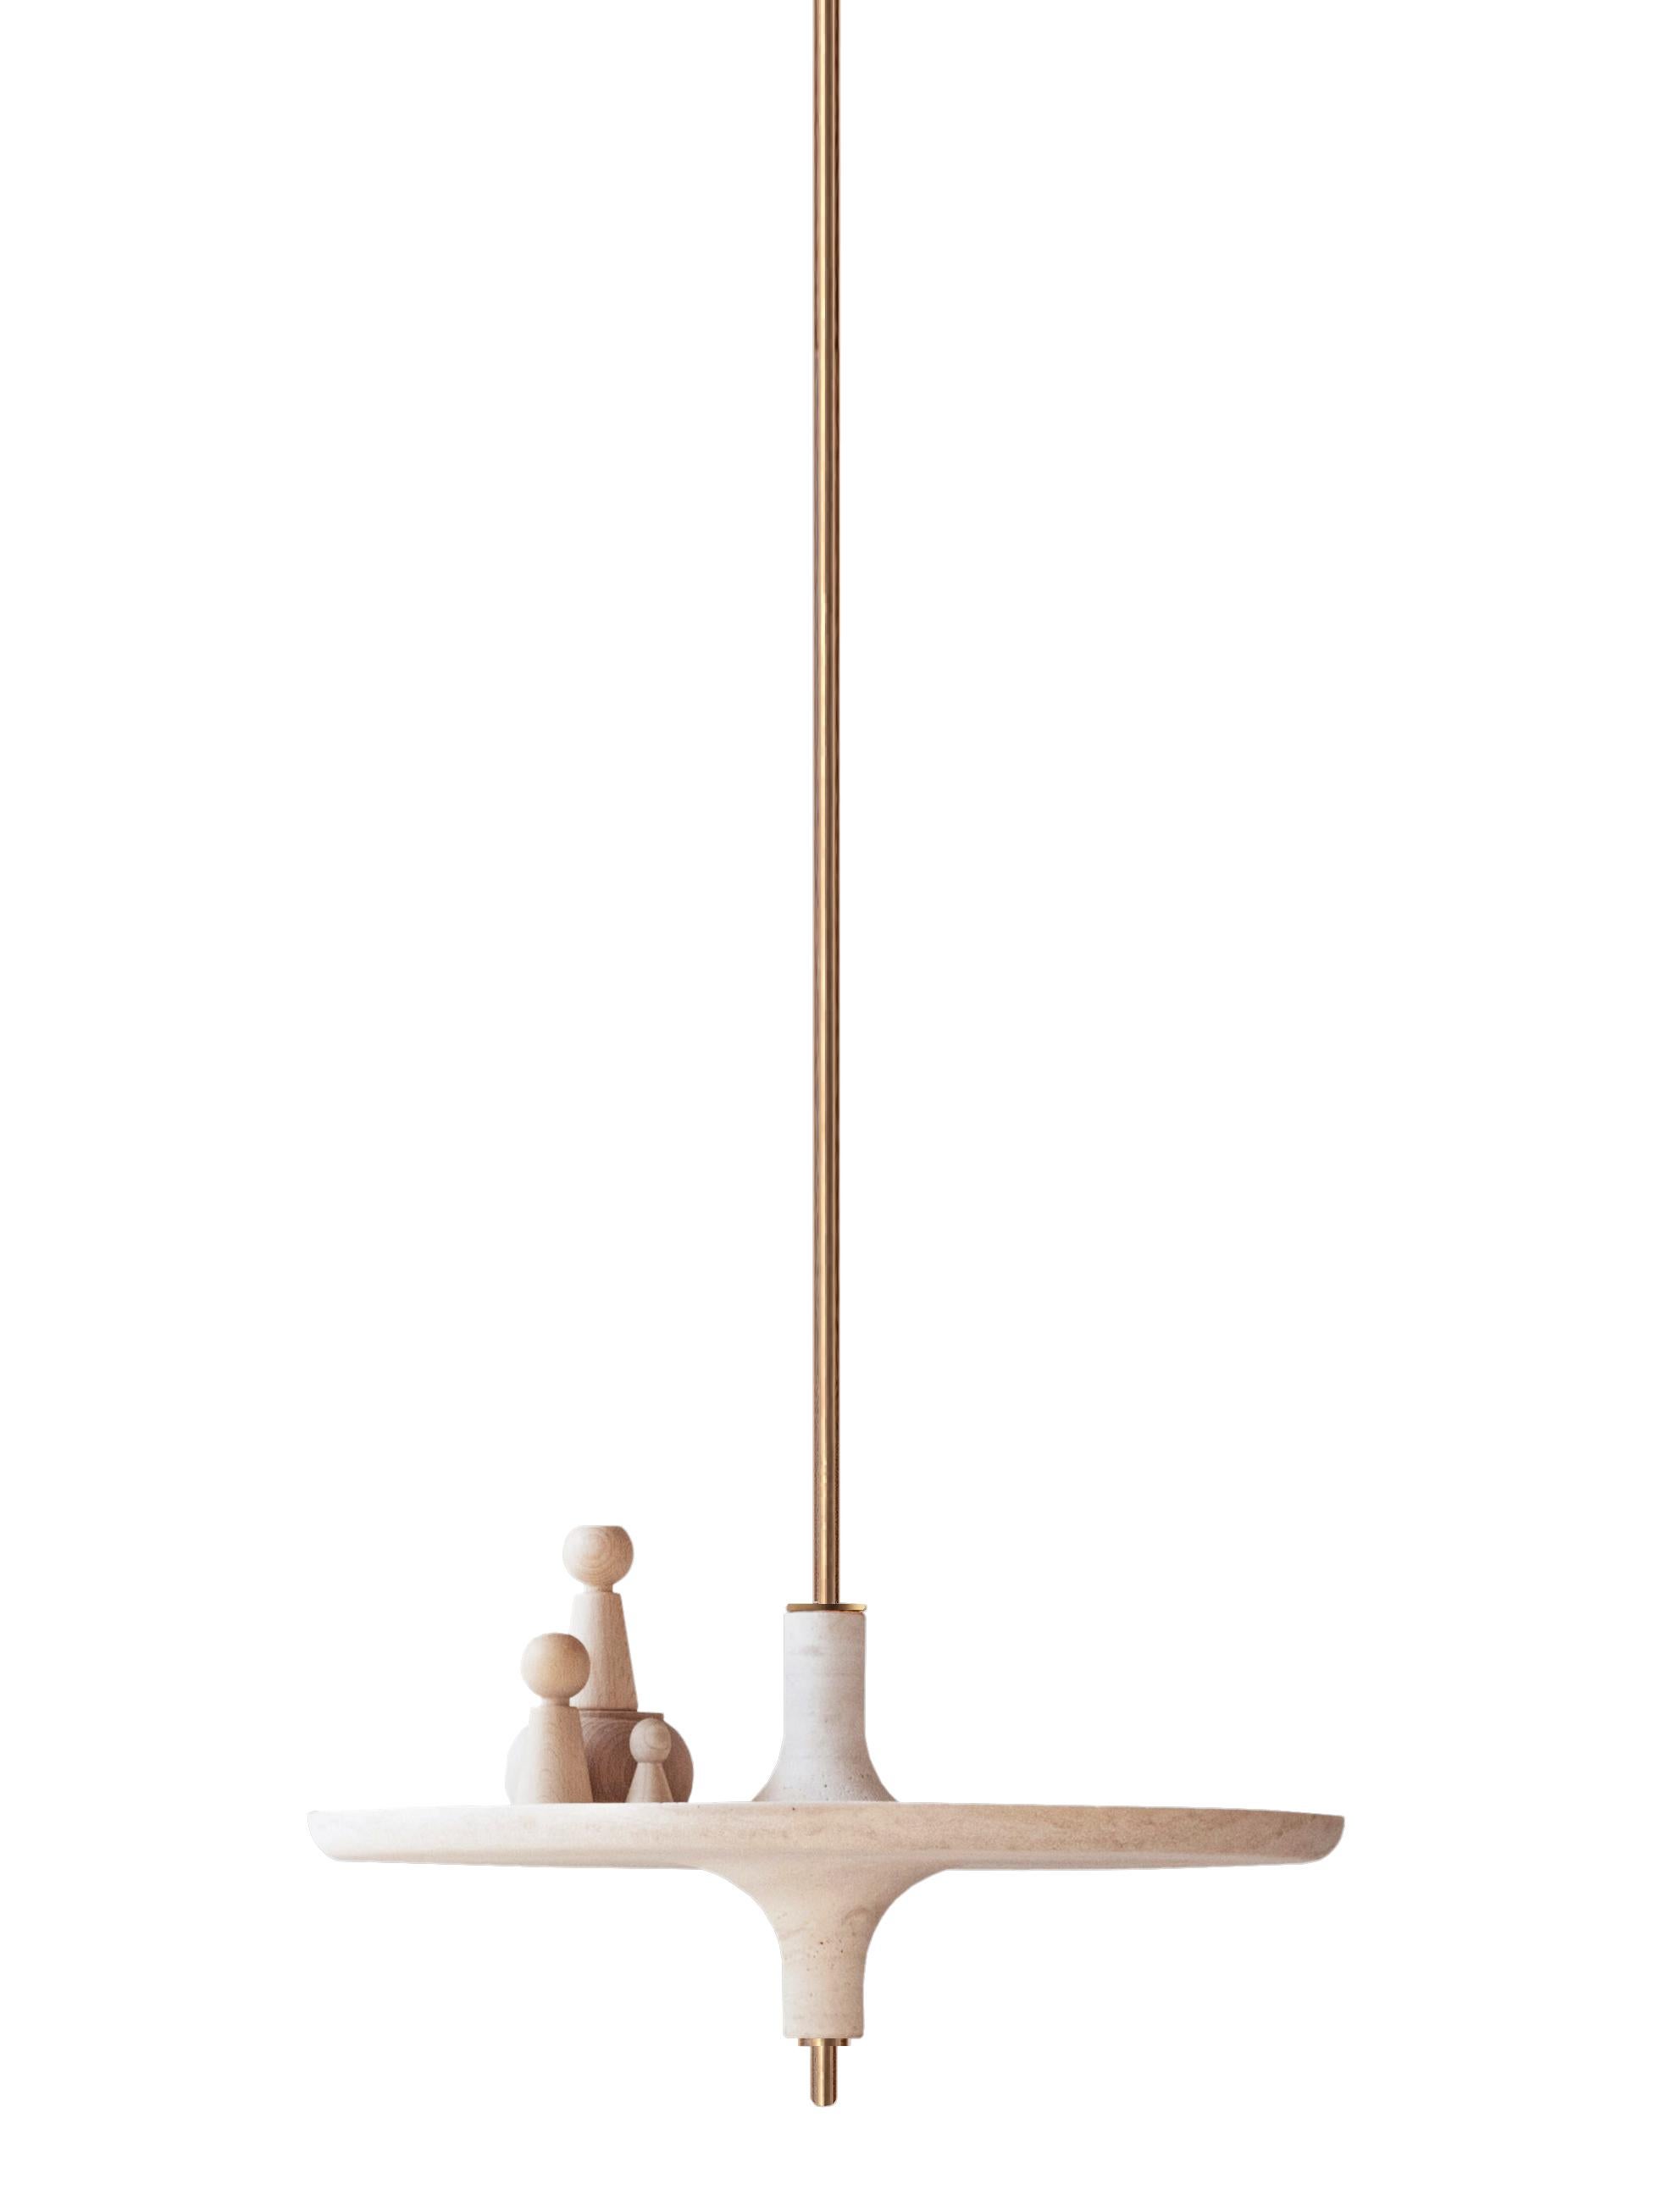 Toupy Travertine and Brass 44 Hanging Table by Mademoiselle Jo
Dimensions: Ø 44 x H 200 cm.
Materials: Travertine and brass.

Available in four wood colors, three marble options, two bar versions and several diameters. Please contact us. 

The